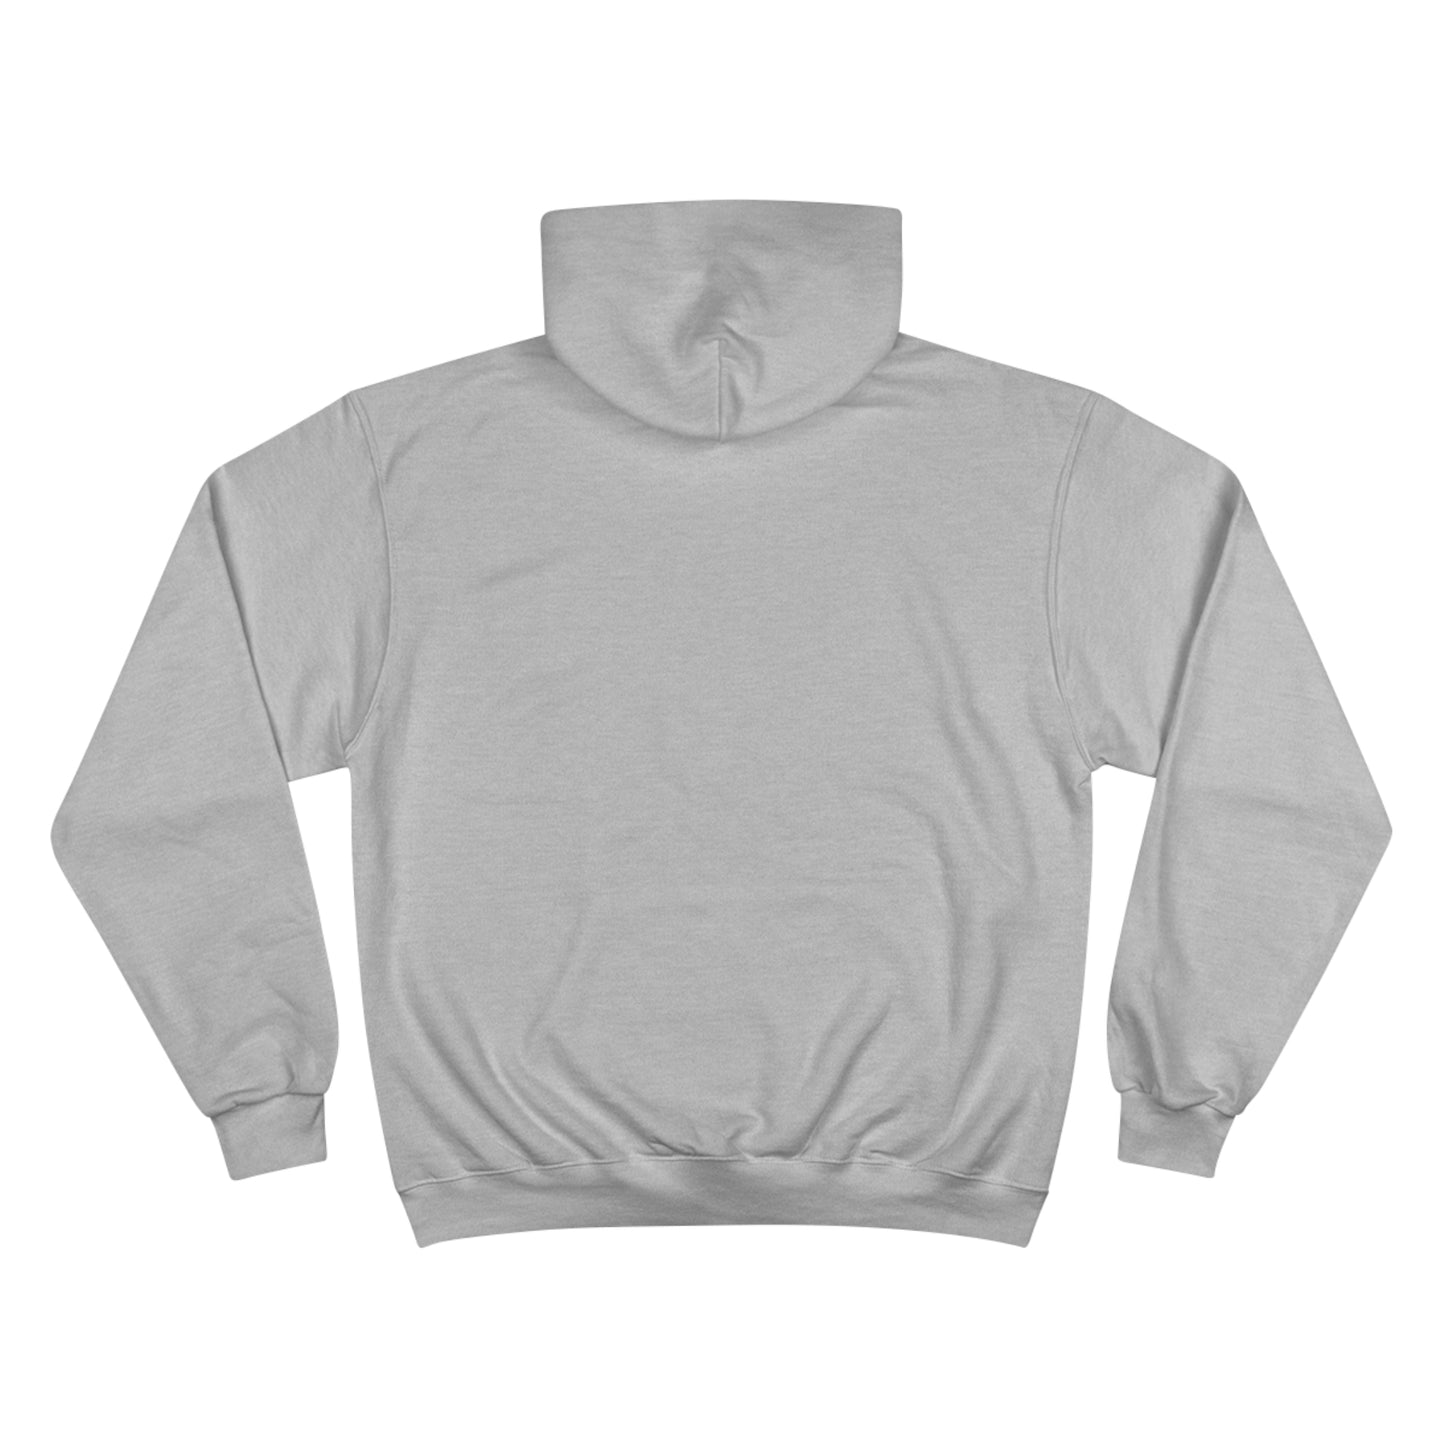 CHI-CTY - Classic Chicago | Hoodie